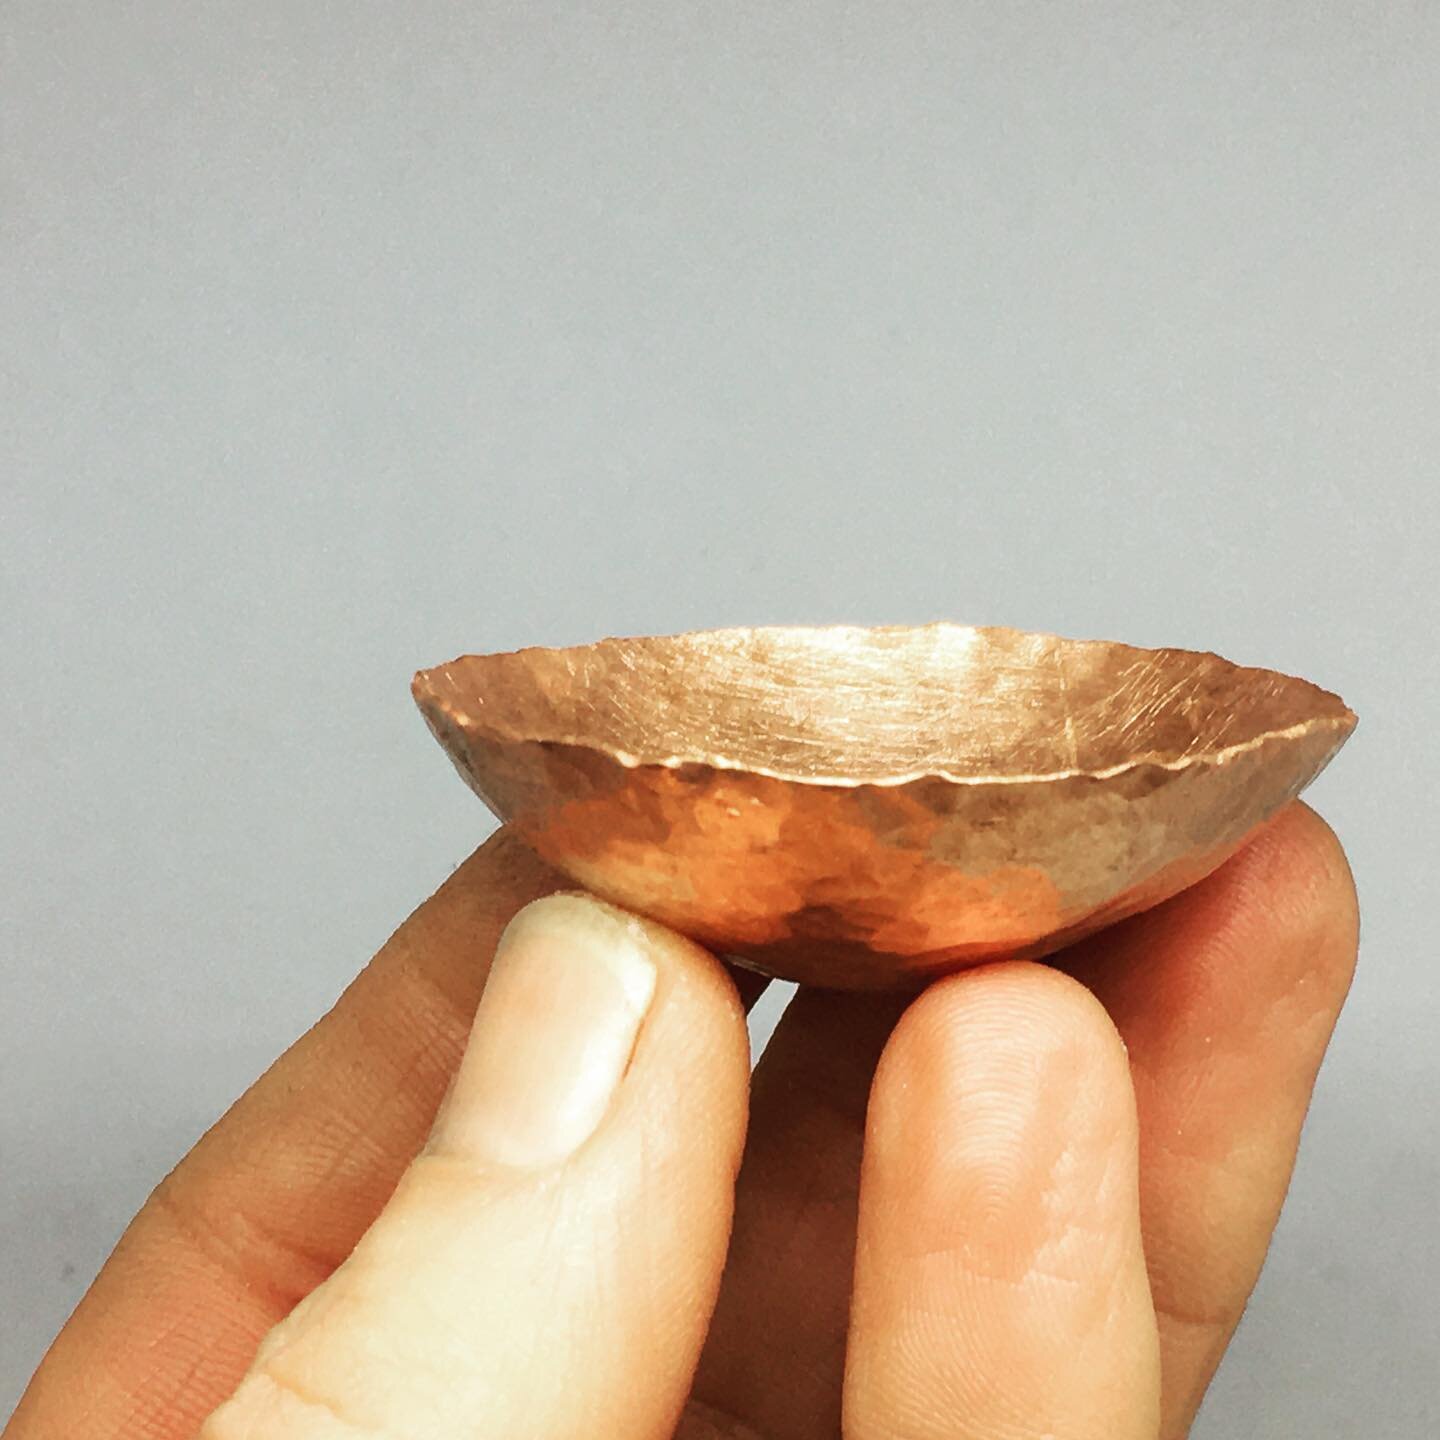 I&rsquo;m delighted to be teaching on this brand new five day silversmithing course at @westhopecollege launching on Tuesday 20th September. We will explore scoring, folding, inlay, box making, dish shapes, and a whole lot more, with the option of cr